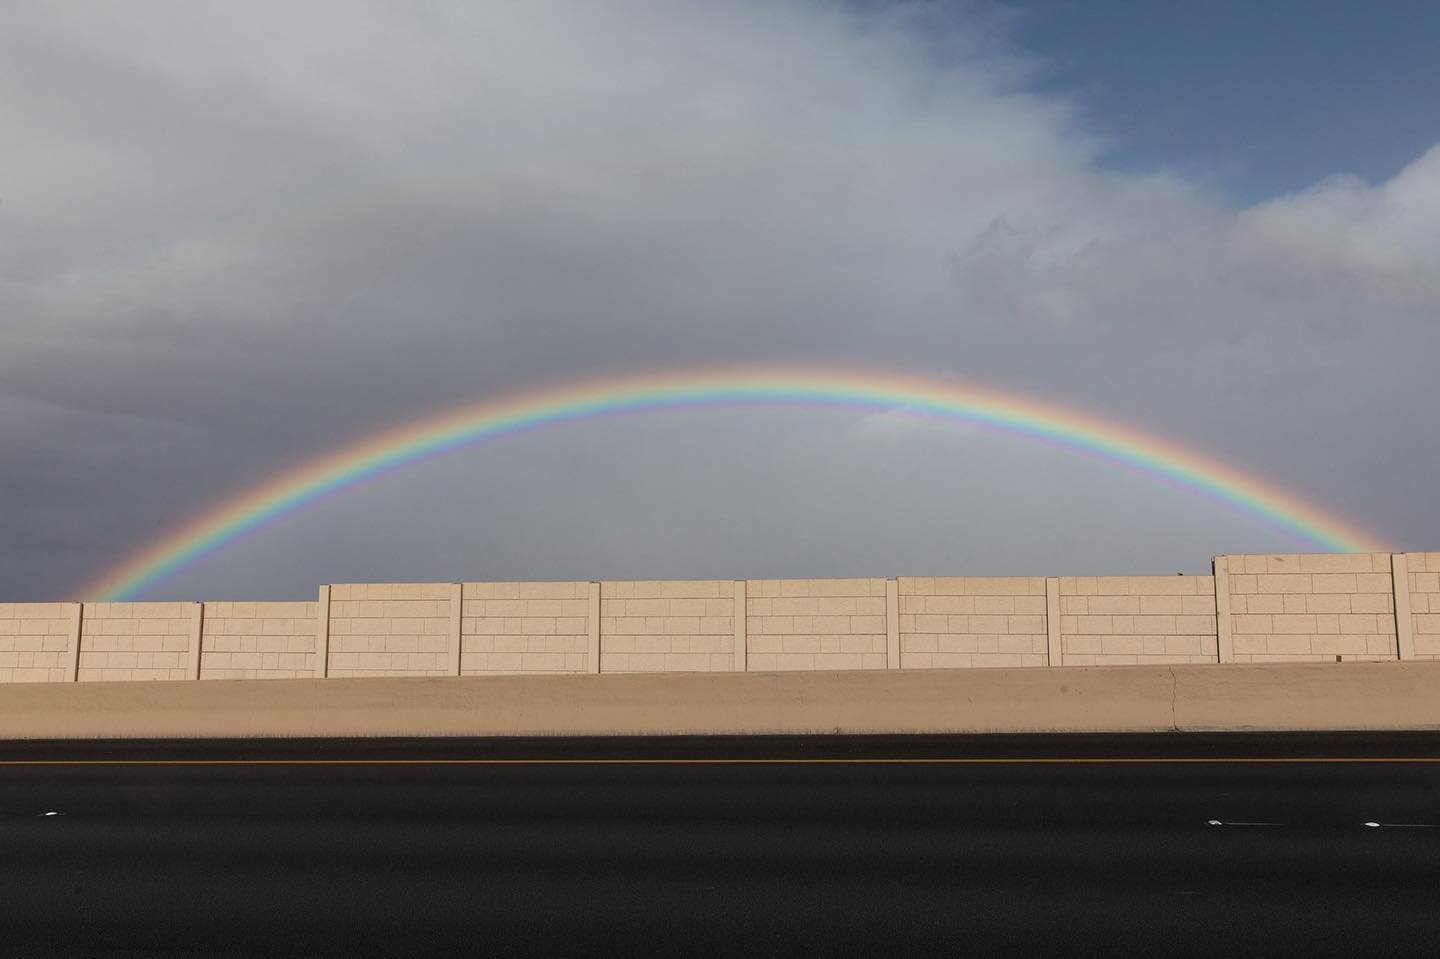 &ldquo;A rainbow breaks thru the sky while driving on the US-95S on November 08, 2022. Seen while I was in between&nbsp;assignment coverage for the US 2022 Midterm Elections, it compelled me to throw on my hazard lights and pull off the highway to ph